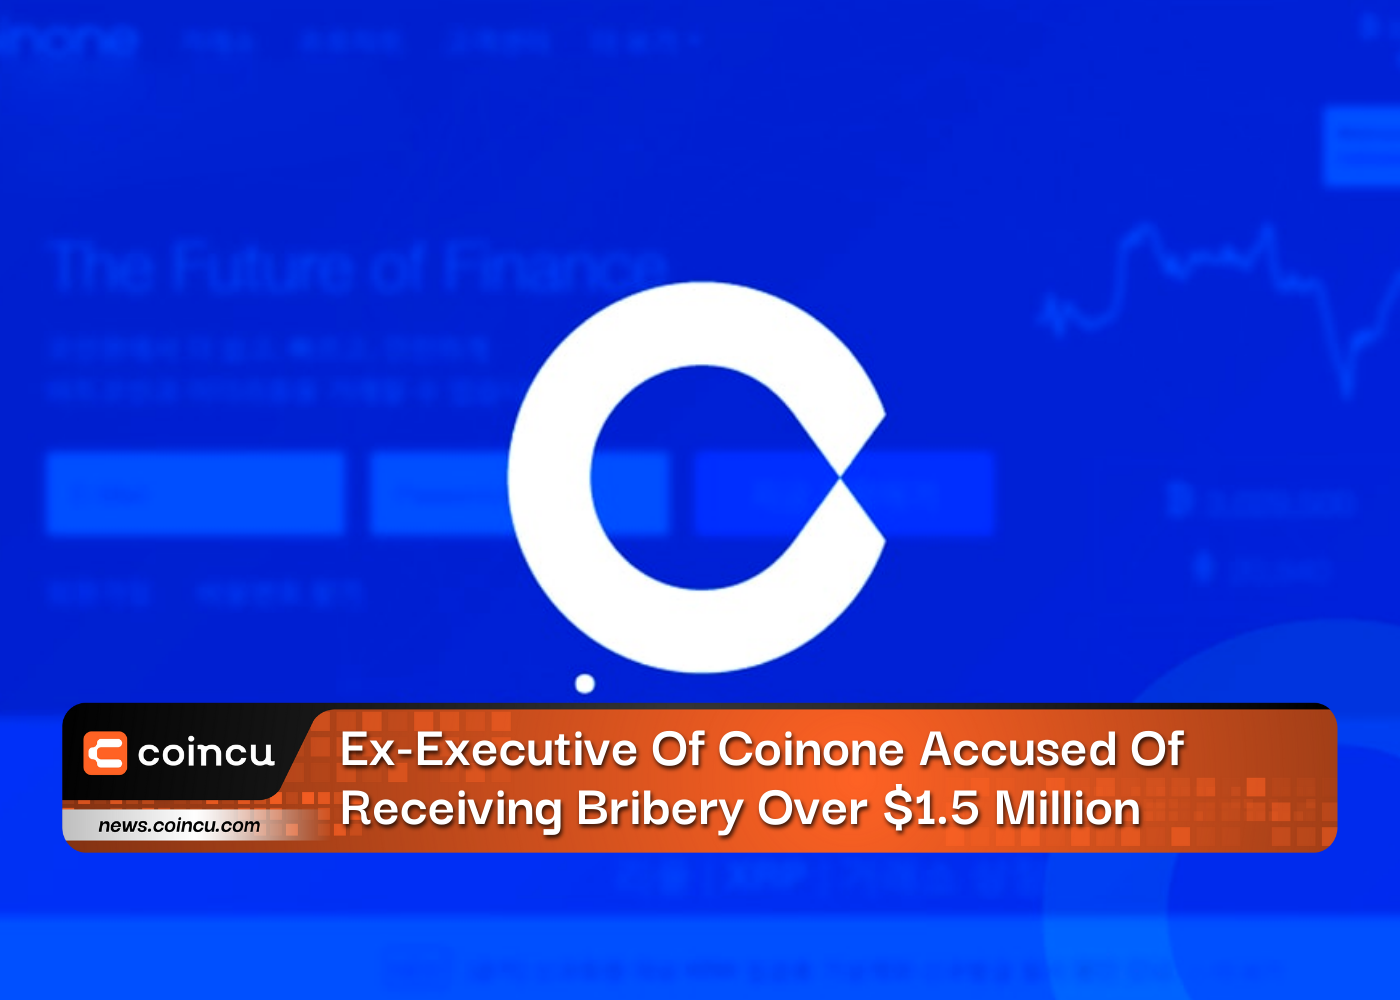 Ex-Executive Of Coinone Accused Of Receiving Bribery Over $1.5 Million